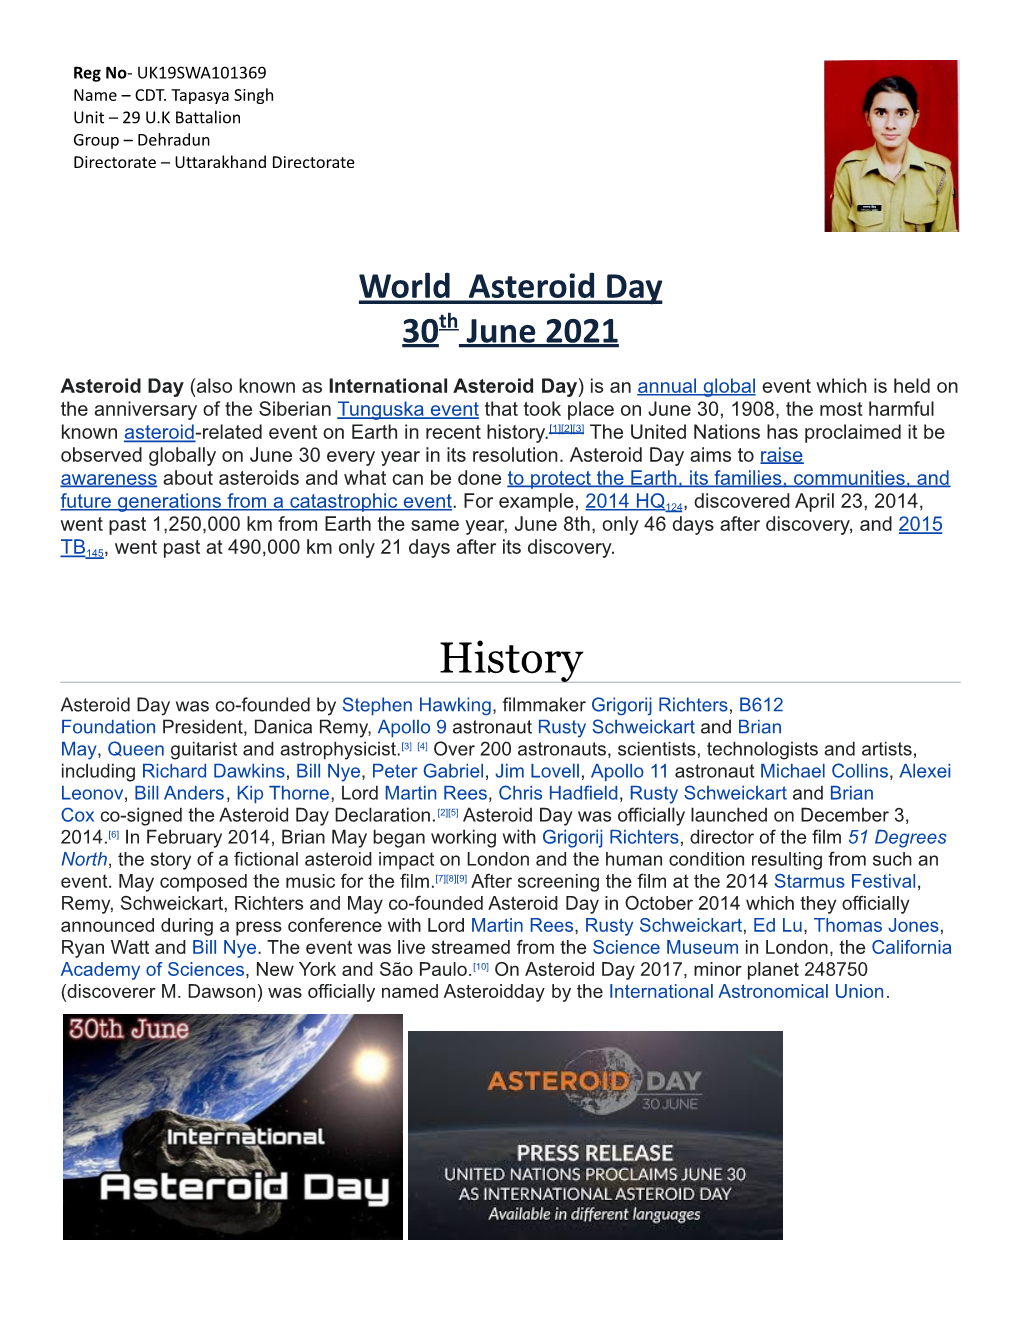 Asteroid Day 30Th June 2021